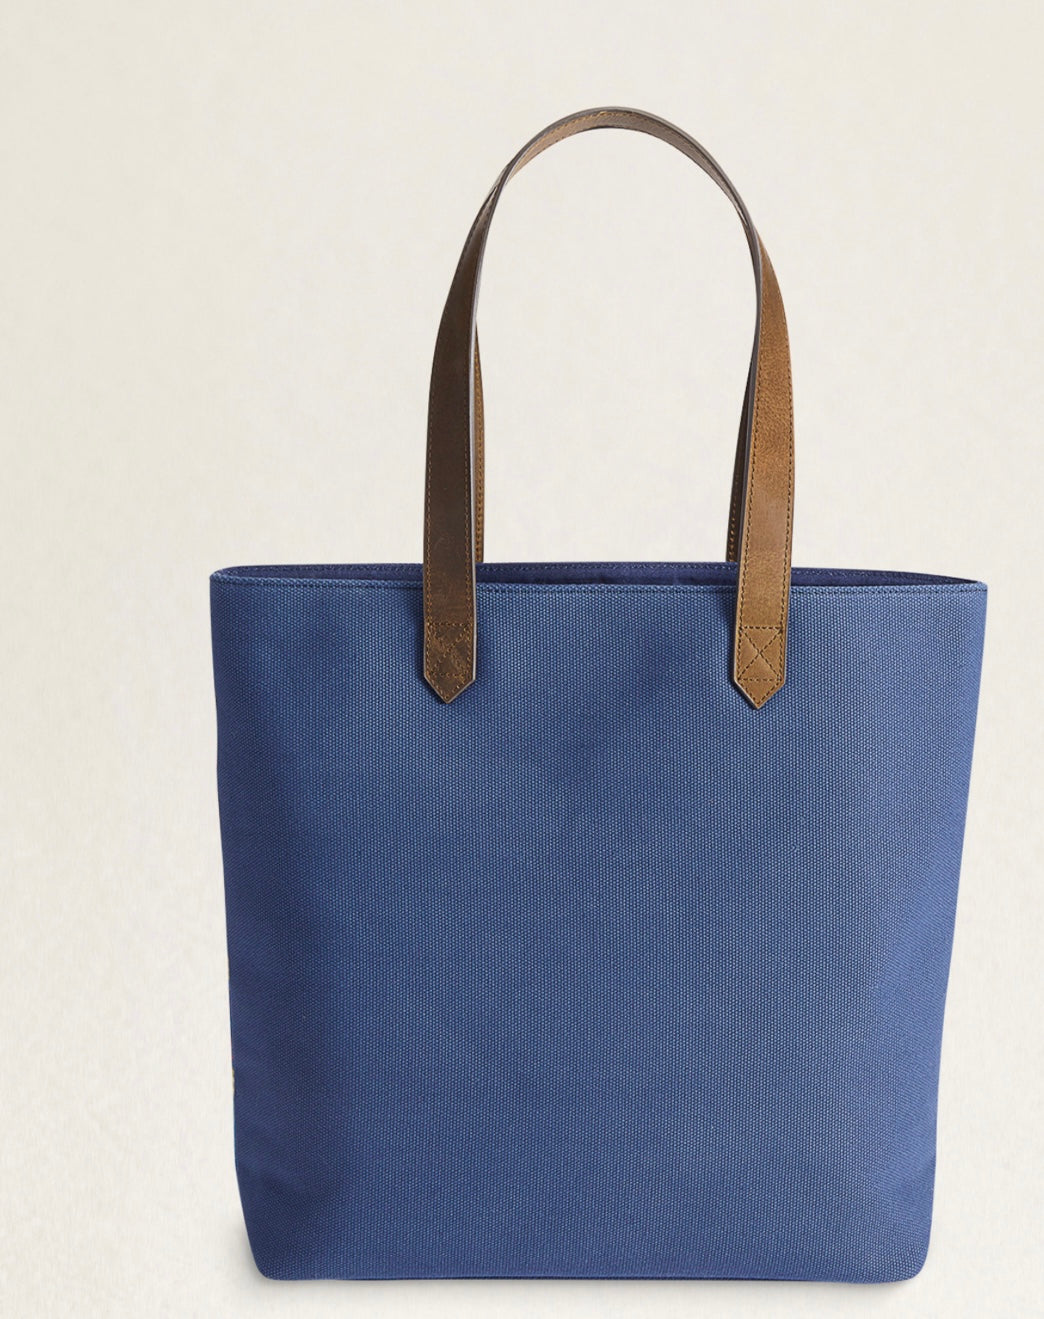 LIMITED EDITION HARDING MARKET TOTE